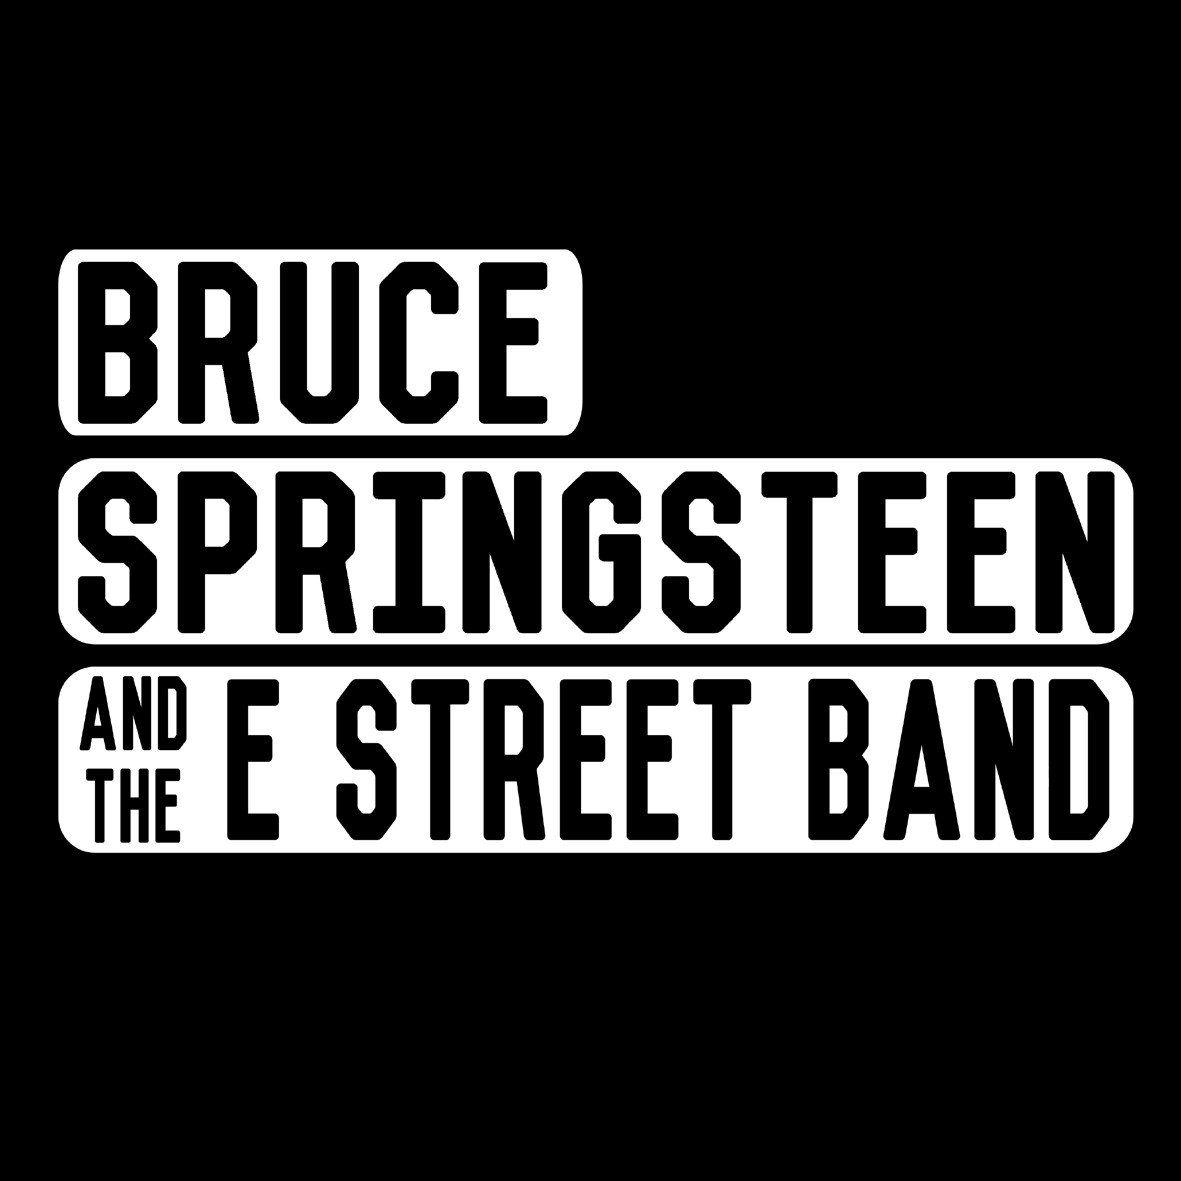 Bruce Springsteen Logo - Bruce Springsteen and Band 2 – CENTRAL T-SHIRTS